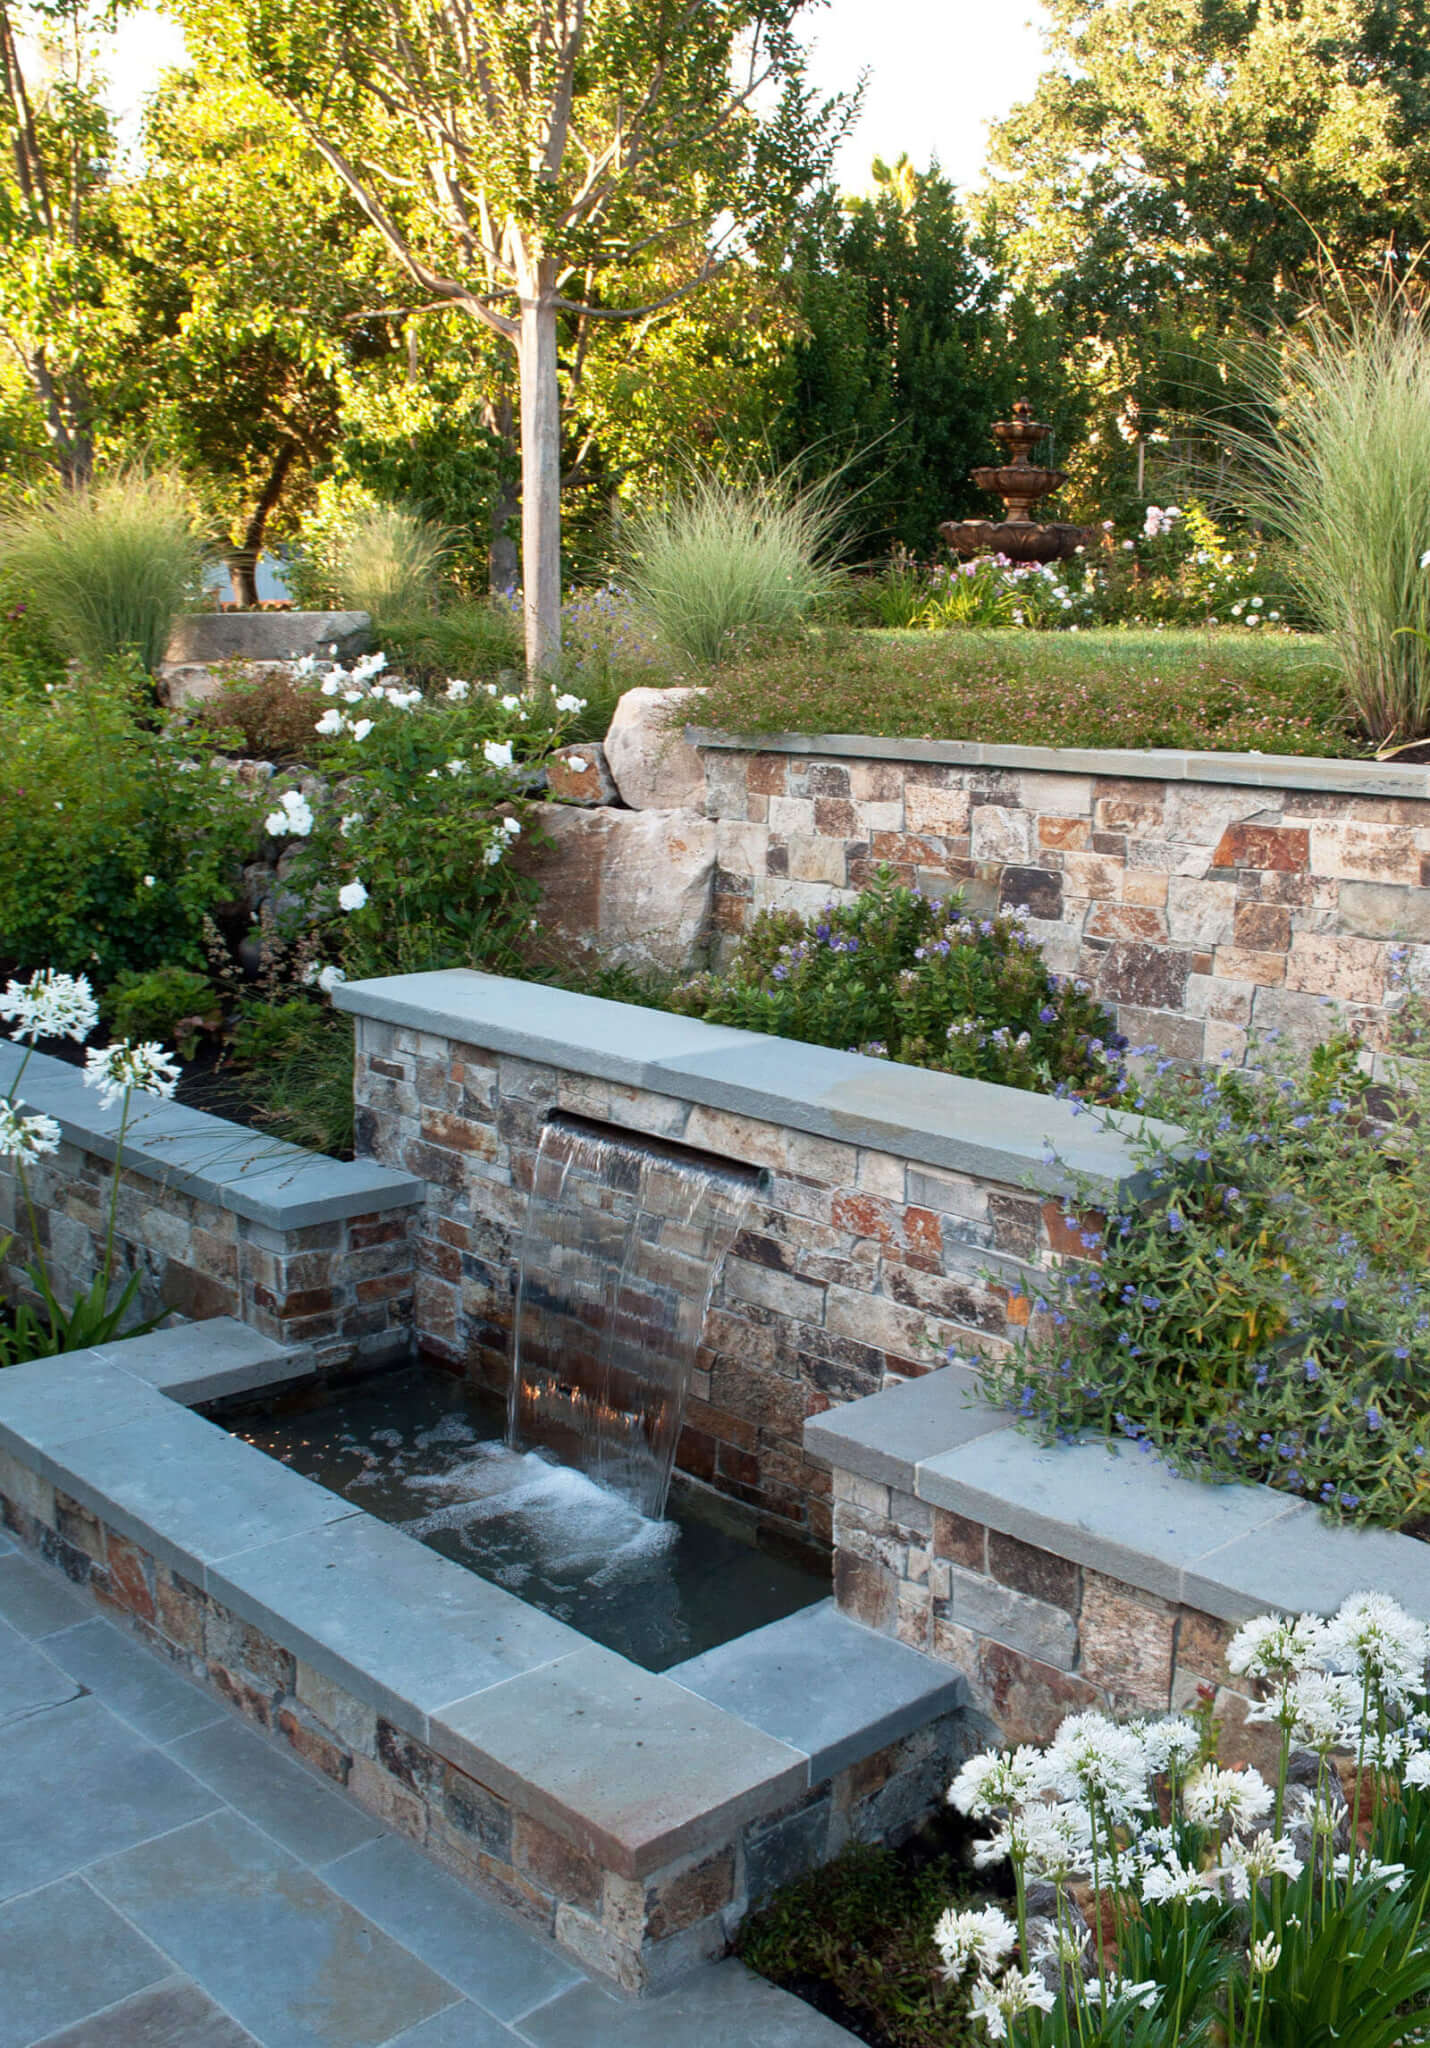 Staged garden with lovely waterfall fountain and tile perimeter